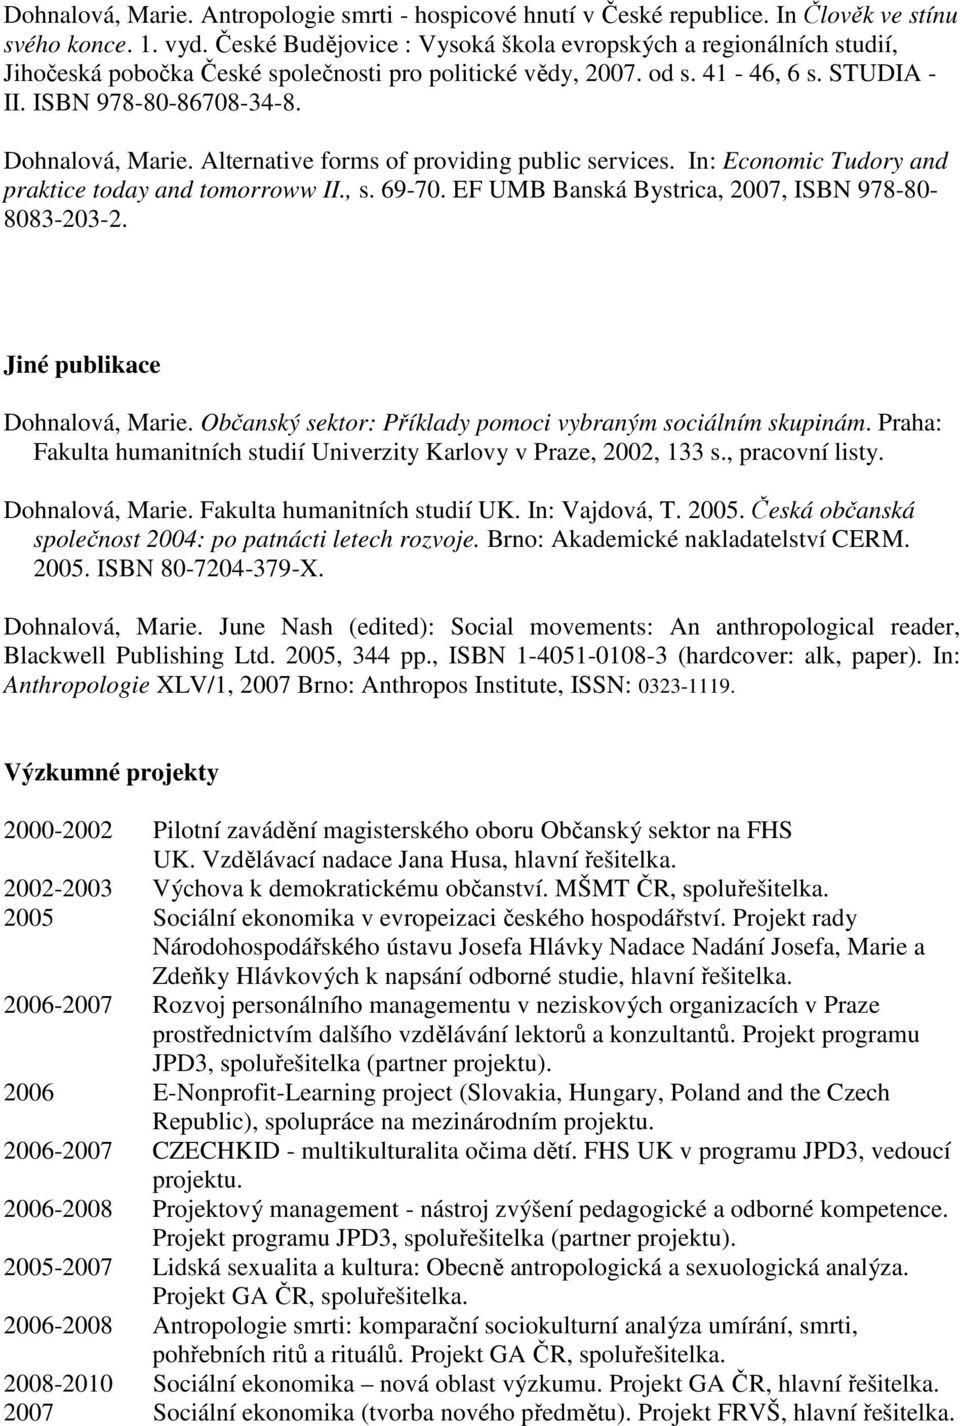 Alternative forms of providing public services. In: Economic Tudory and praktice today and tomorroww II., s. 69-70. EF UMB Banská Bystrica, 2007, ISBN 978-80- 8083-203-2.